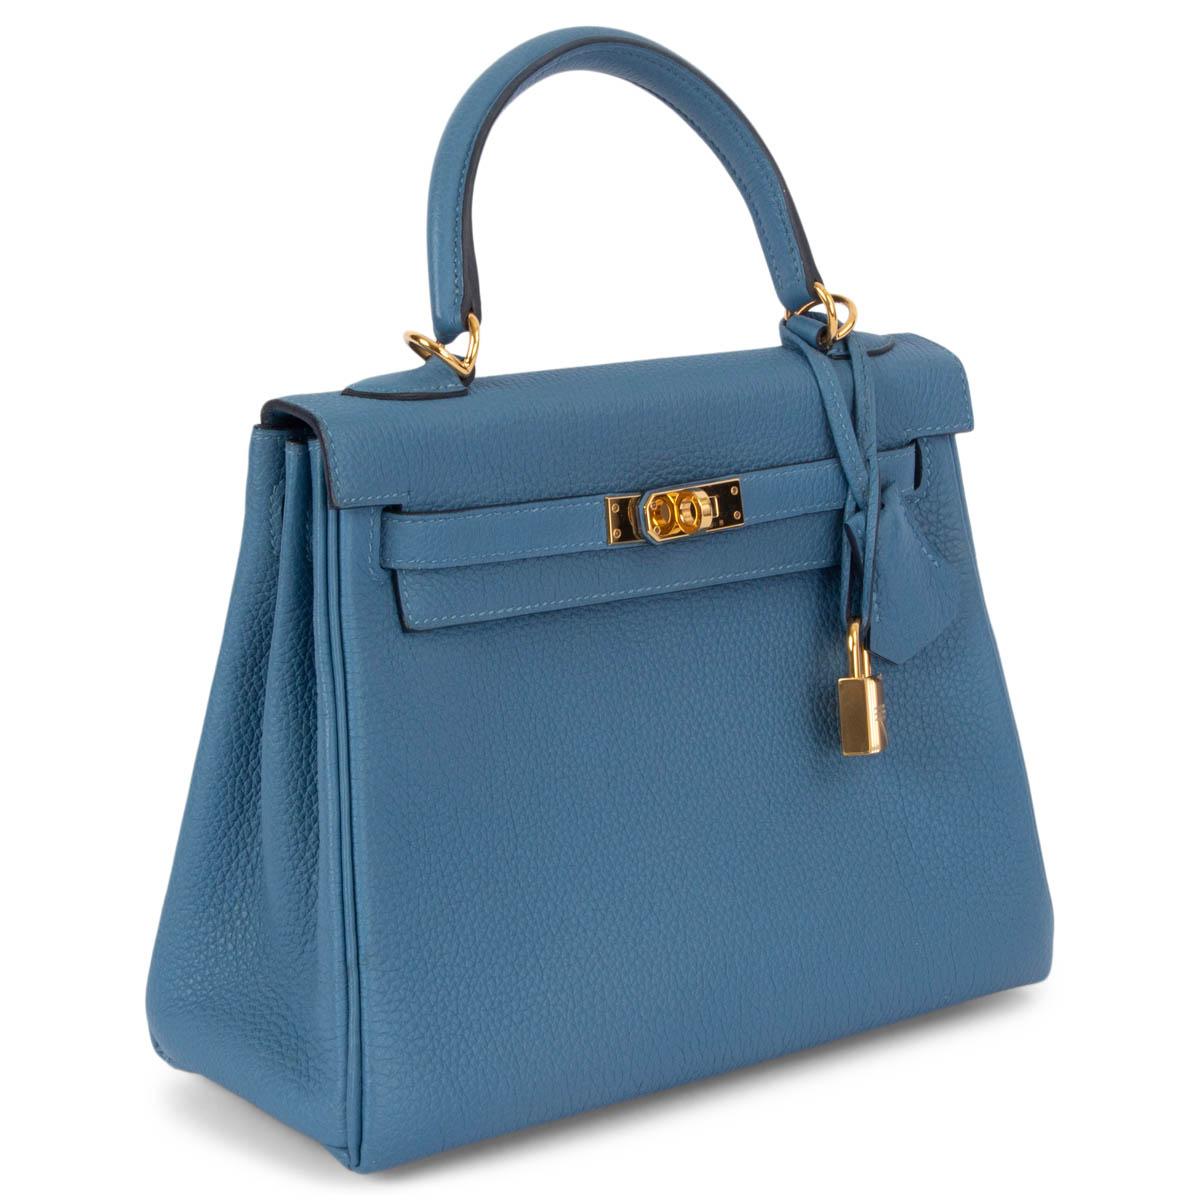 100% authentic Hermès Kelly II 25 Retourne bag in Azur blue Veau Togo leather with gold-plated hardware. Lined in Chevre (goat skin) with an open pocket against the front and a zipper pocket against the back. Has been carried and is in virtually new